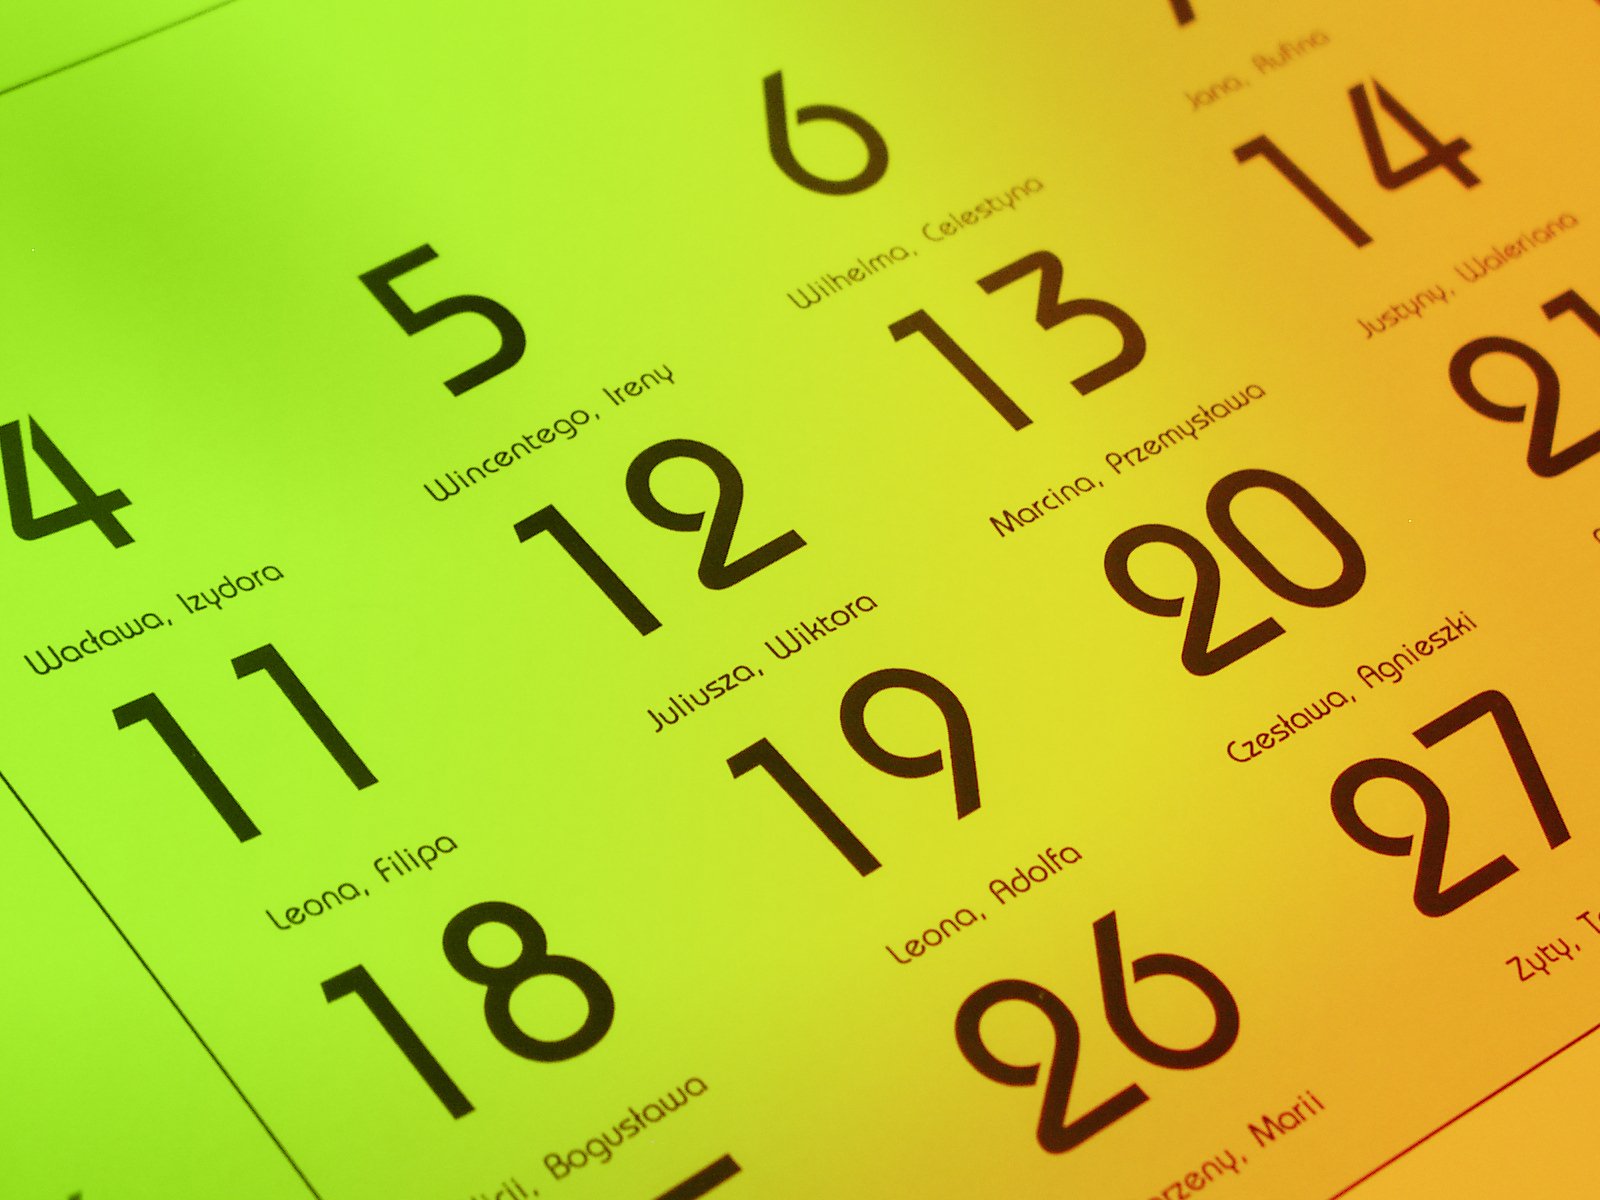 an image of a yellow and green calendar